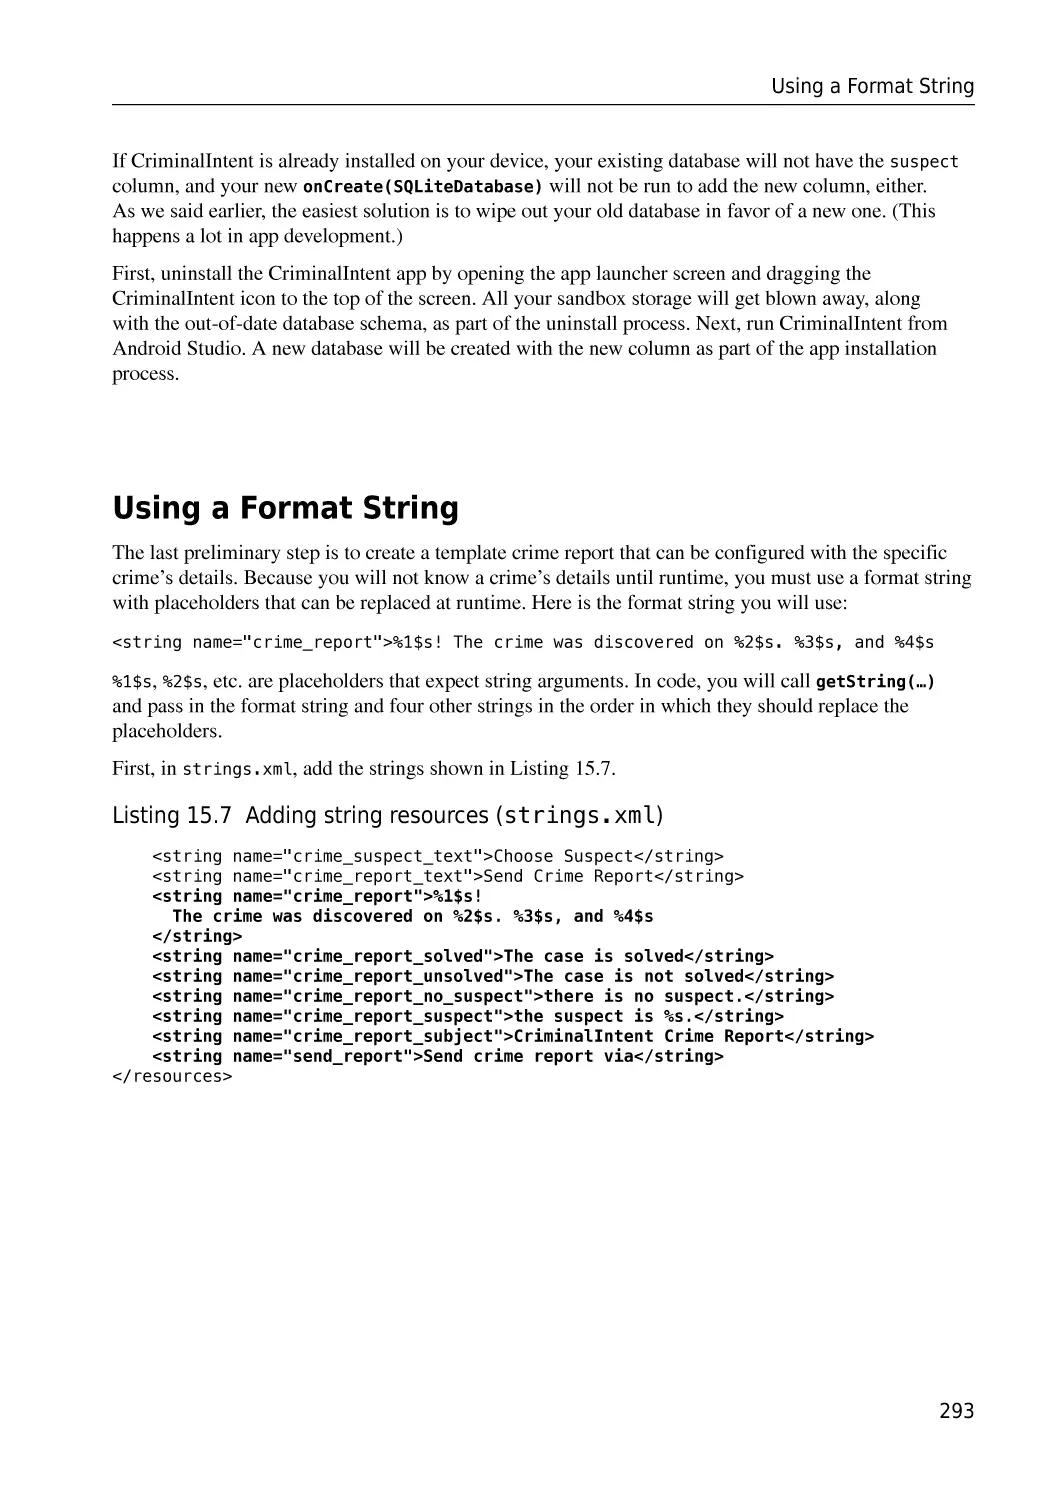 Using a Format String